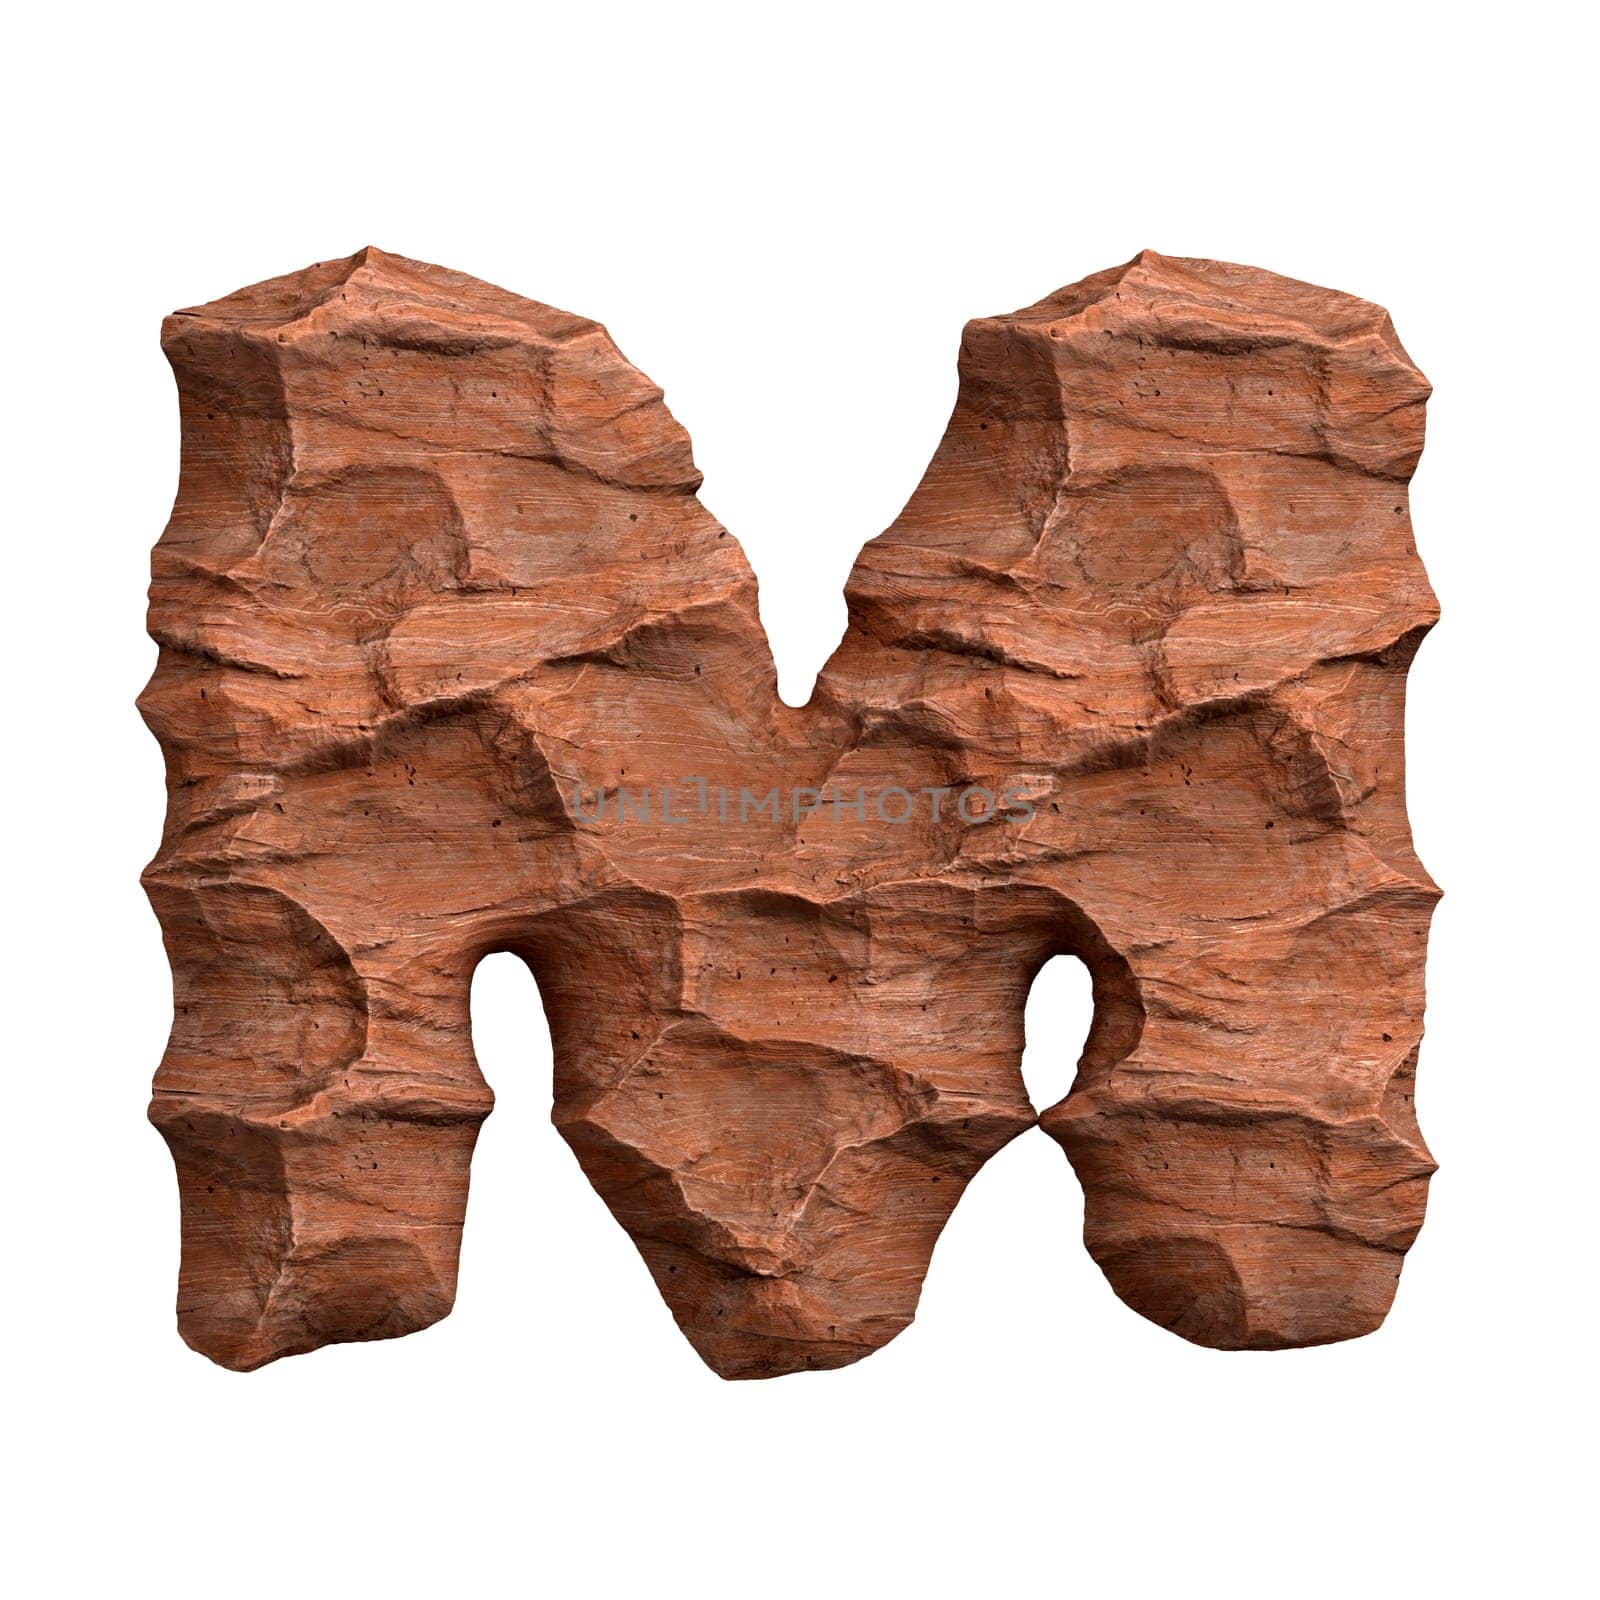 Desert sandstone letter M - Upper-case 3d red rock font isolated on white background. This alphabet is perfect for creative illustrations related but not limited to Arizona, geology, desert...